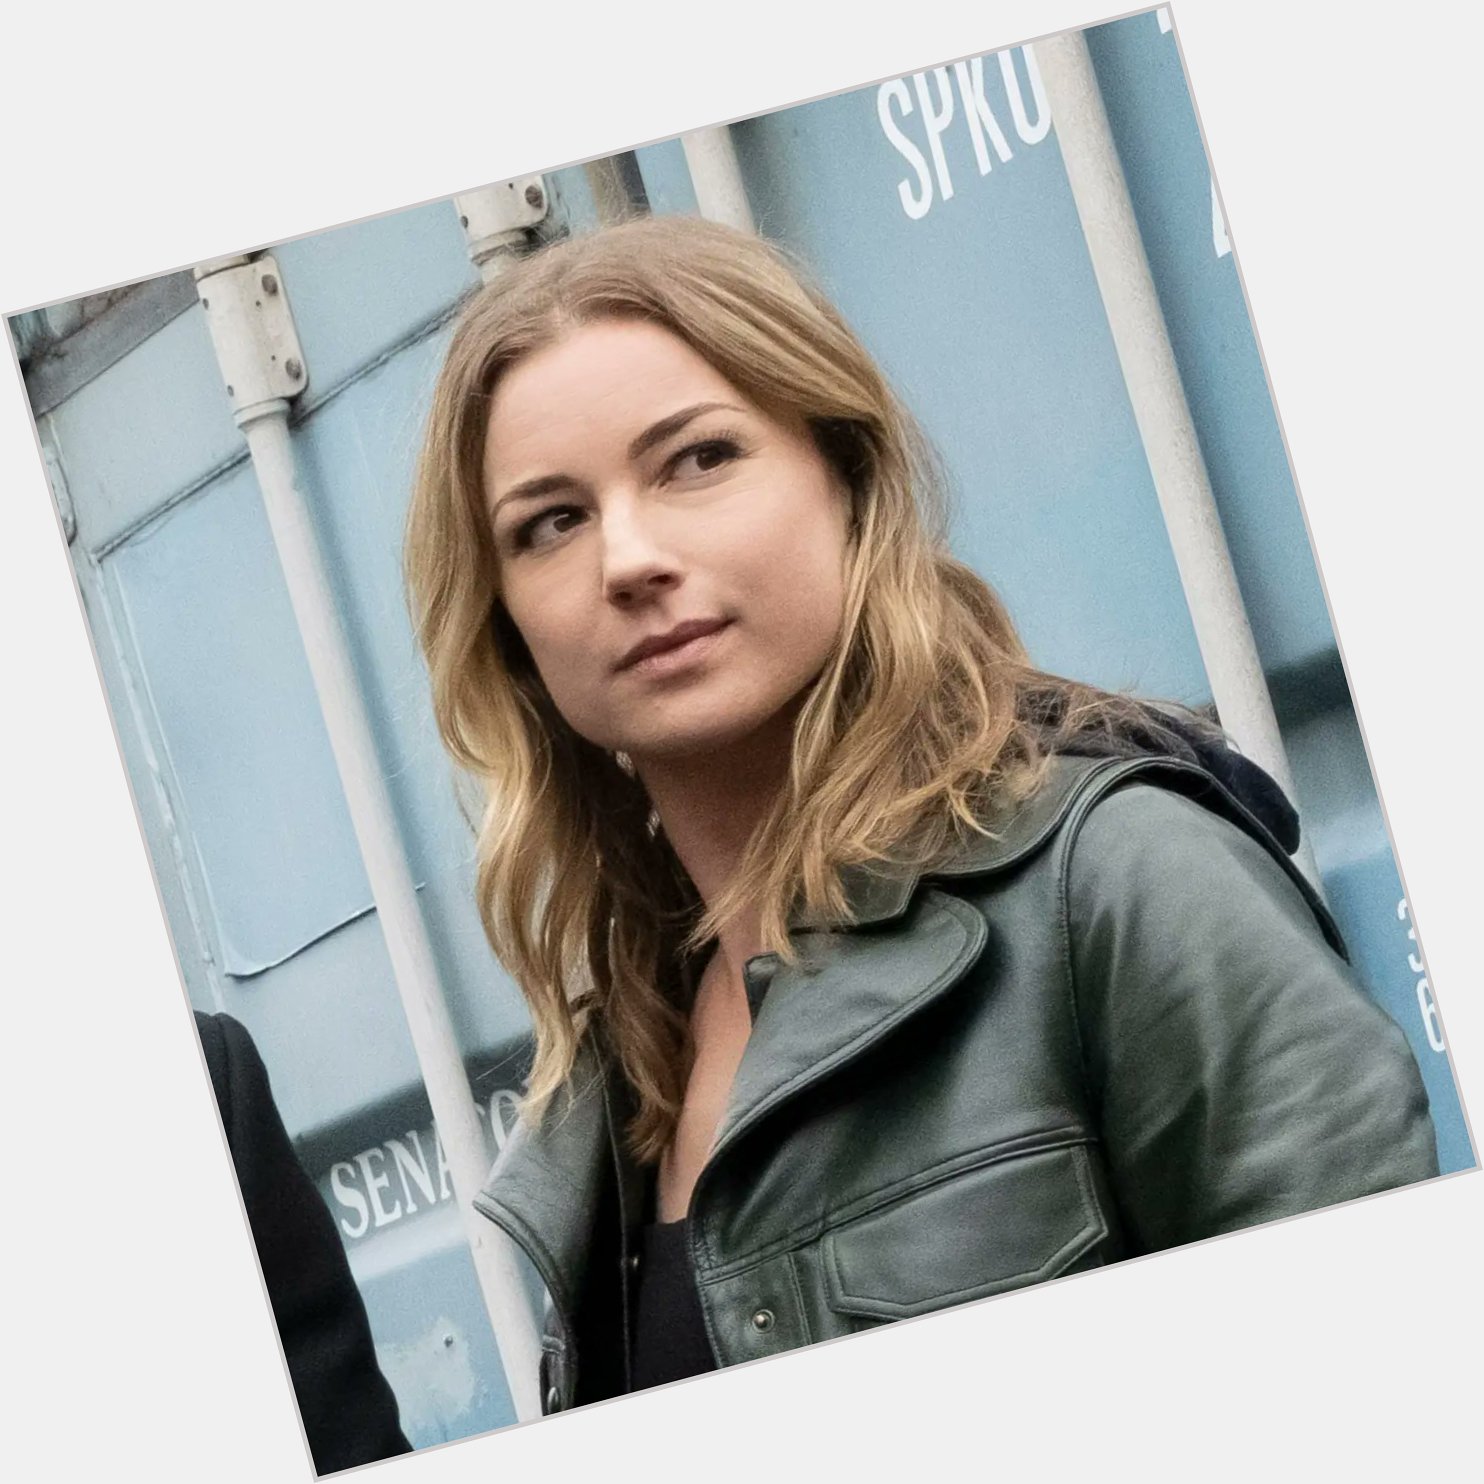 Happy birthday to Emily VanCamp, who portrays the espionage savvy Sharon Carter in the Marvel Cinematic Universe. 